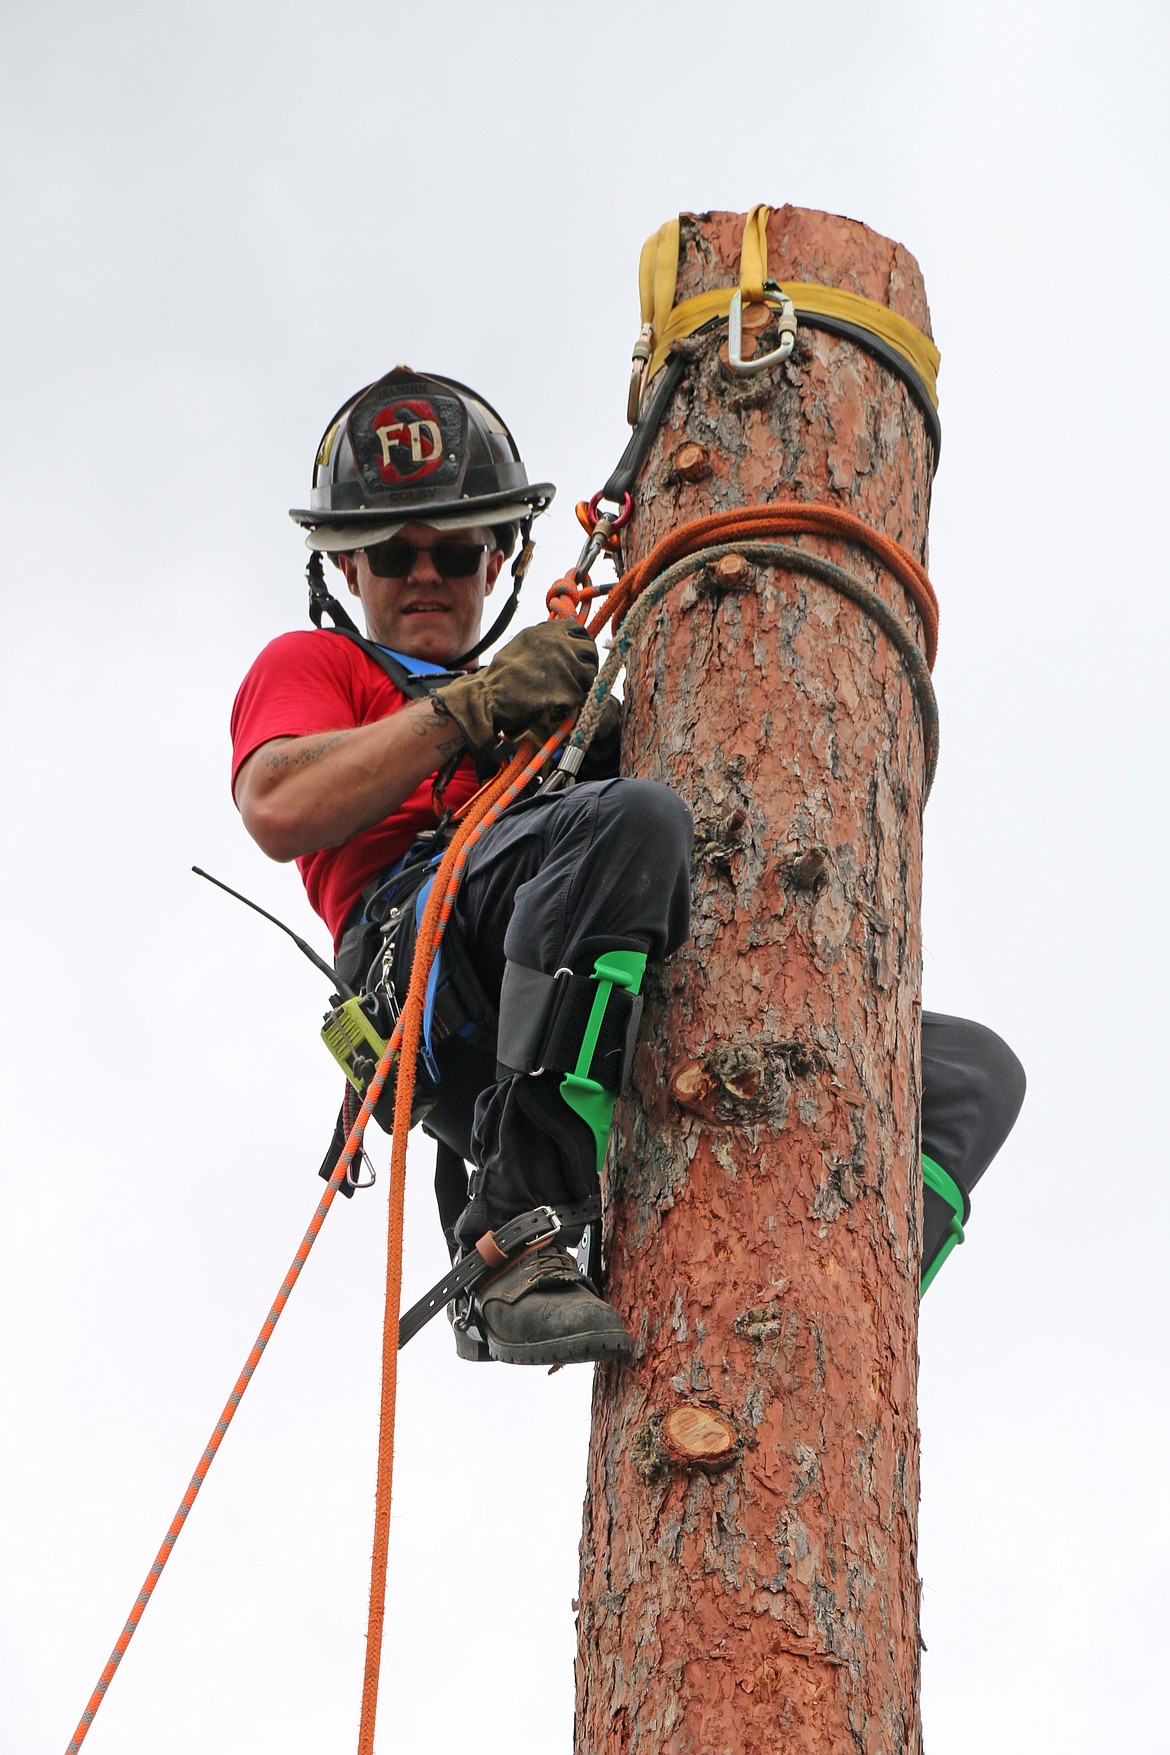 An area firefighter practices climbing a spar pole during a mid-June training exercise on tree rescues.